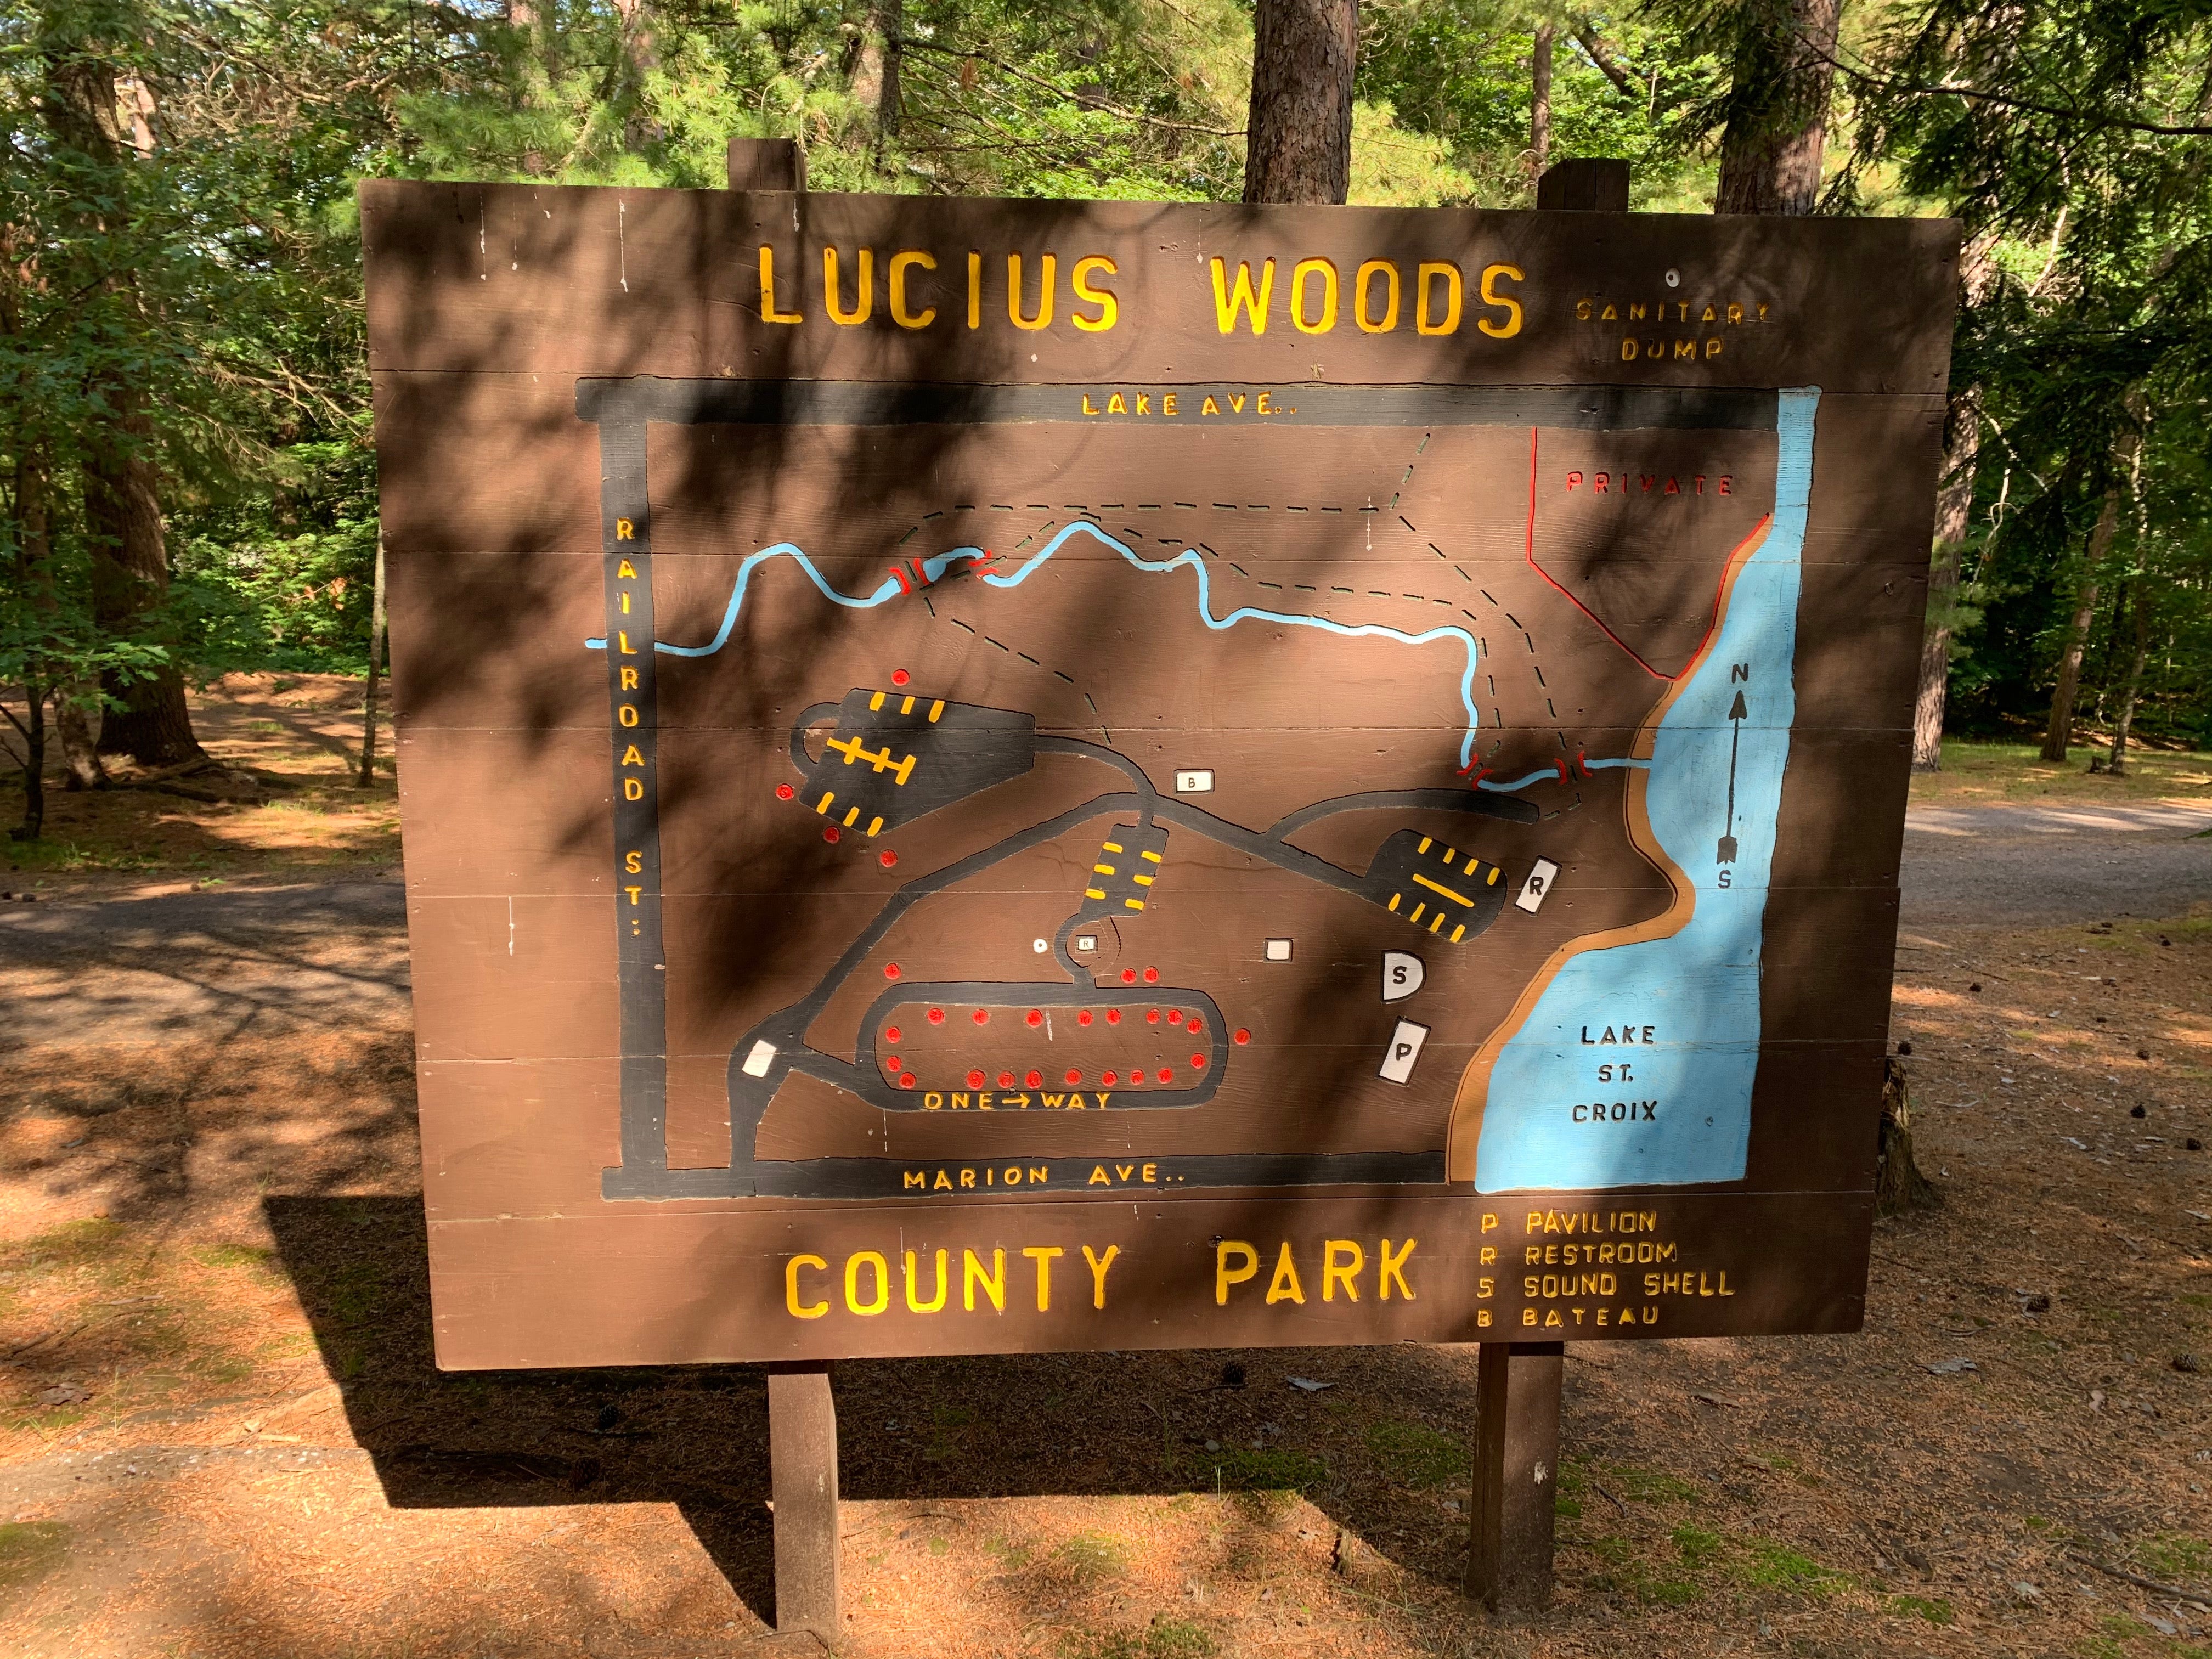 Camper submitted image from Lucius Woods County Park - 2